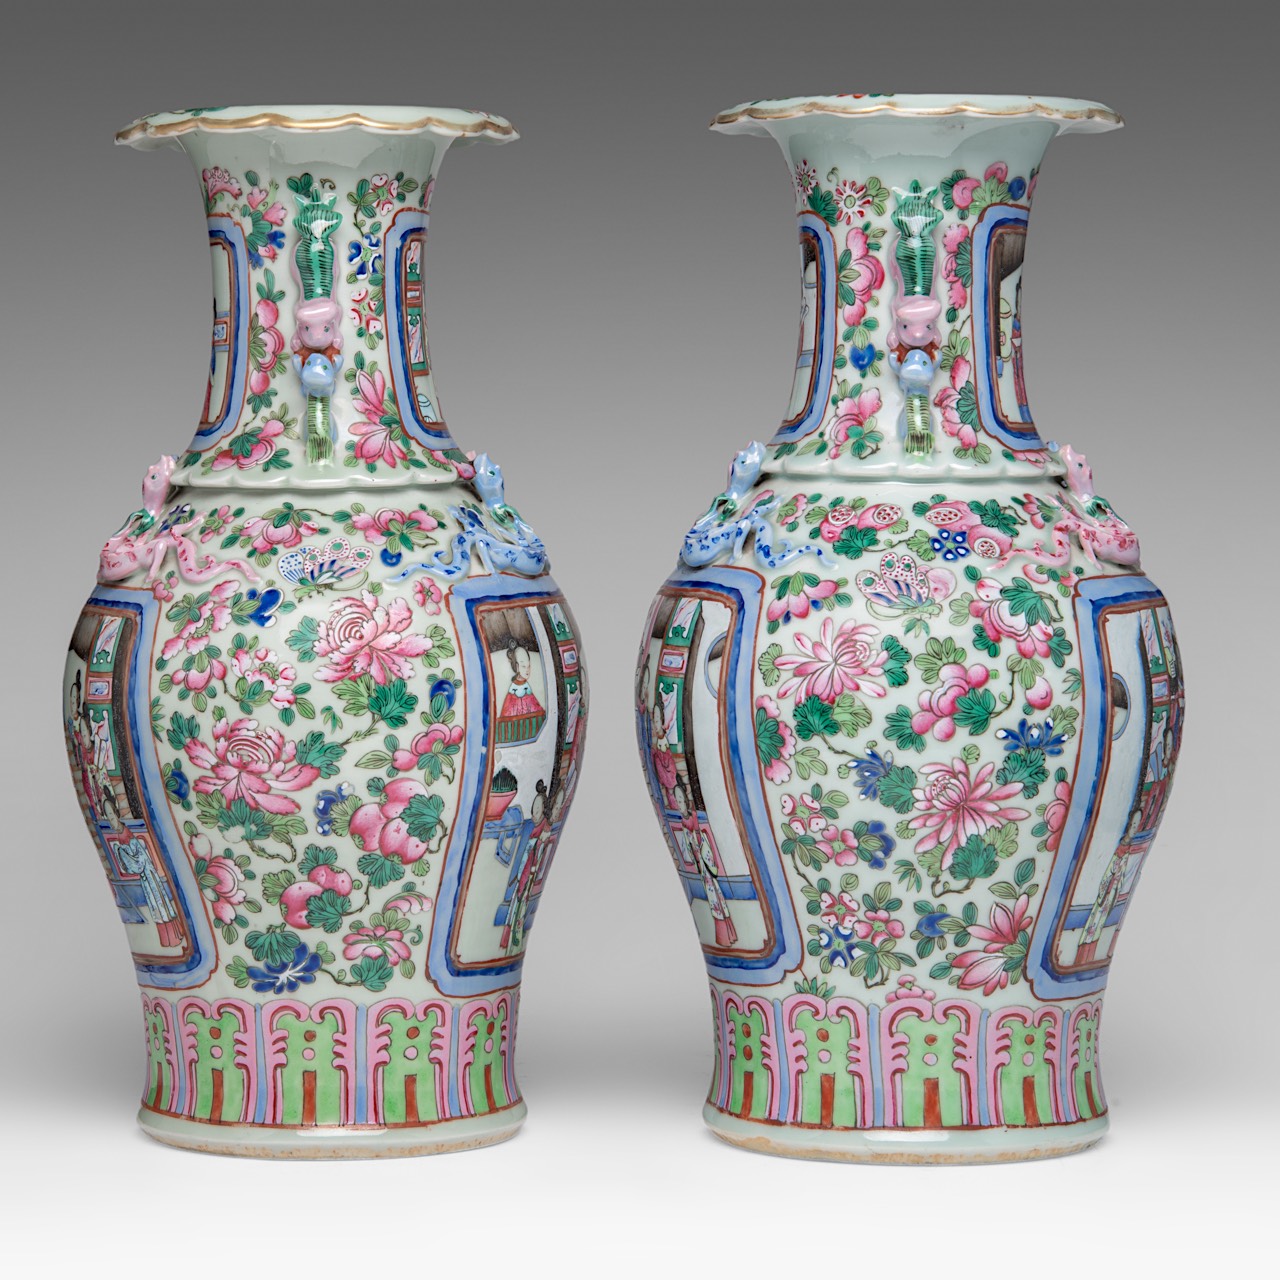 A fine pair of Chinese famille rose 'Beauties in a Chamber' vases, 19thC, H 44 cm - Image 2 of 6